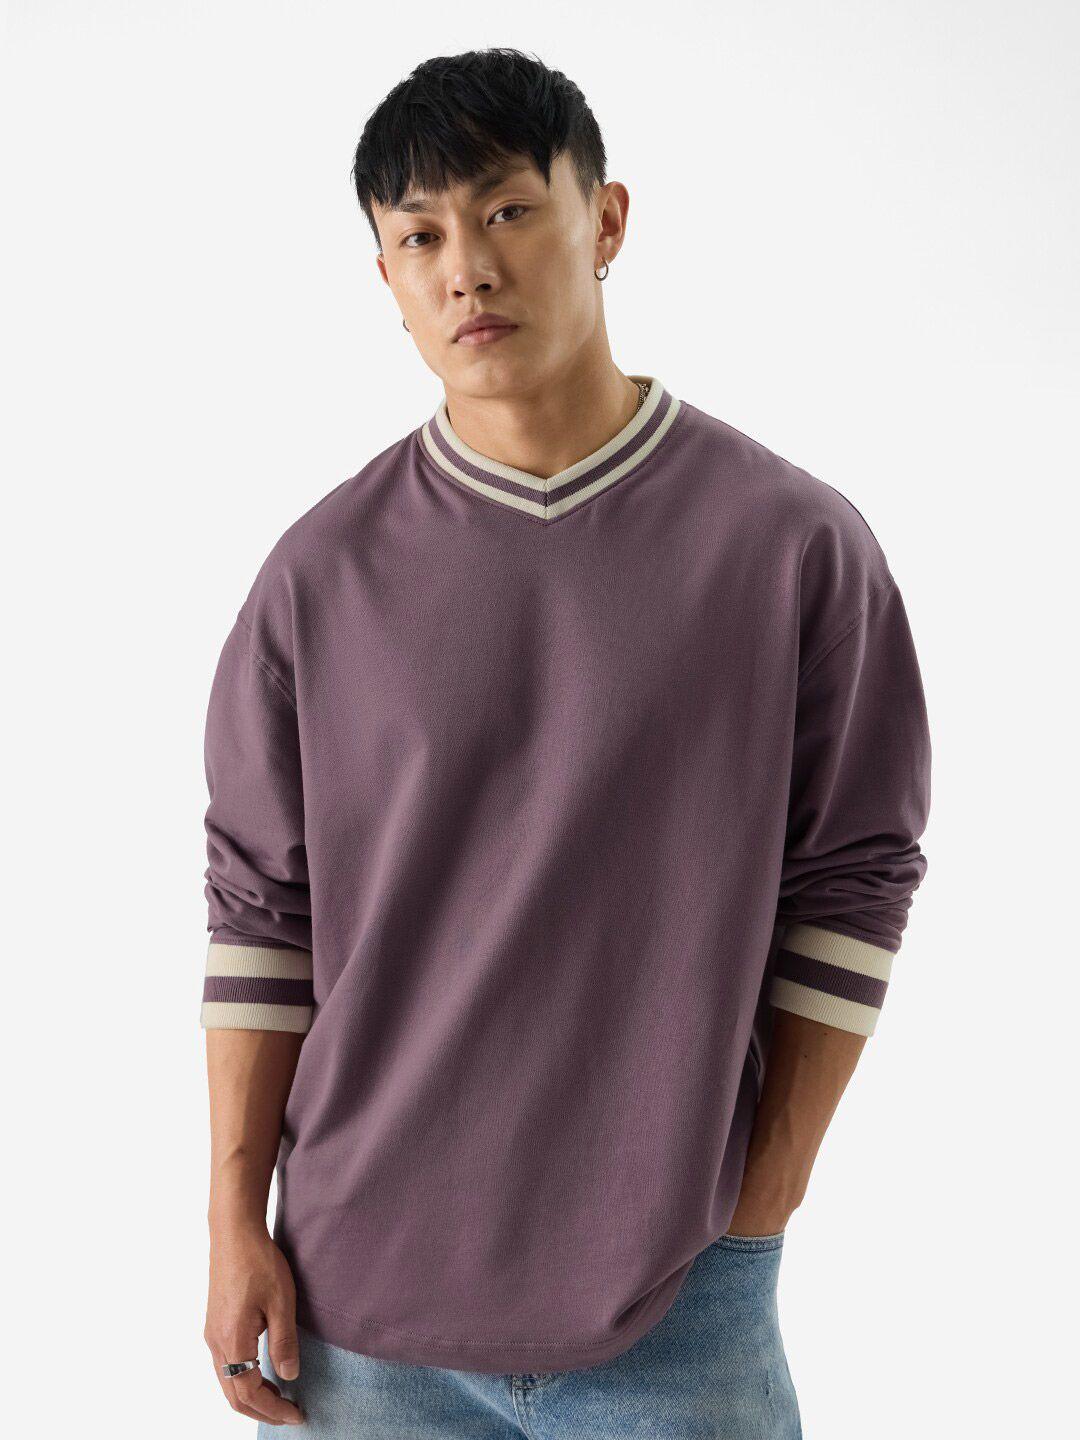 the souled store long sleeves v-neck cotton oversized raw edge t-shirt